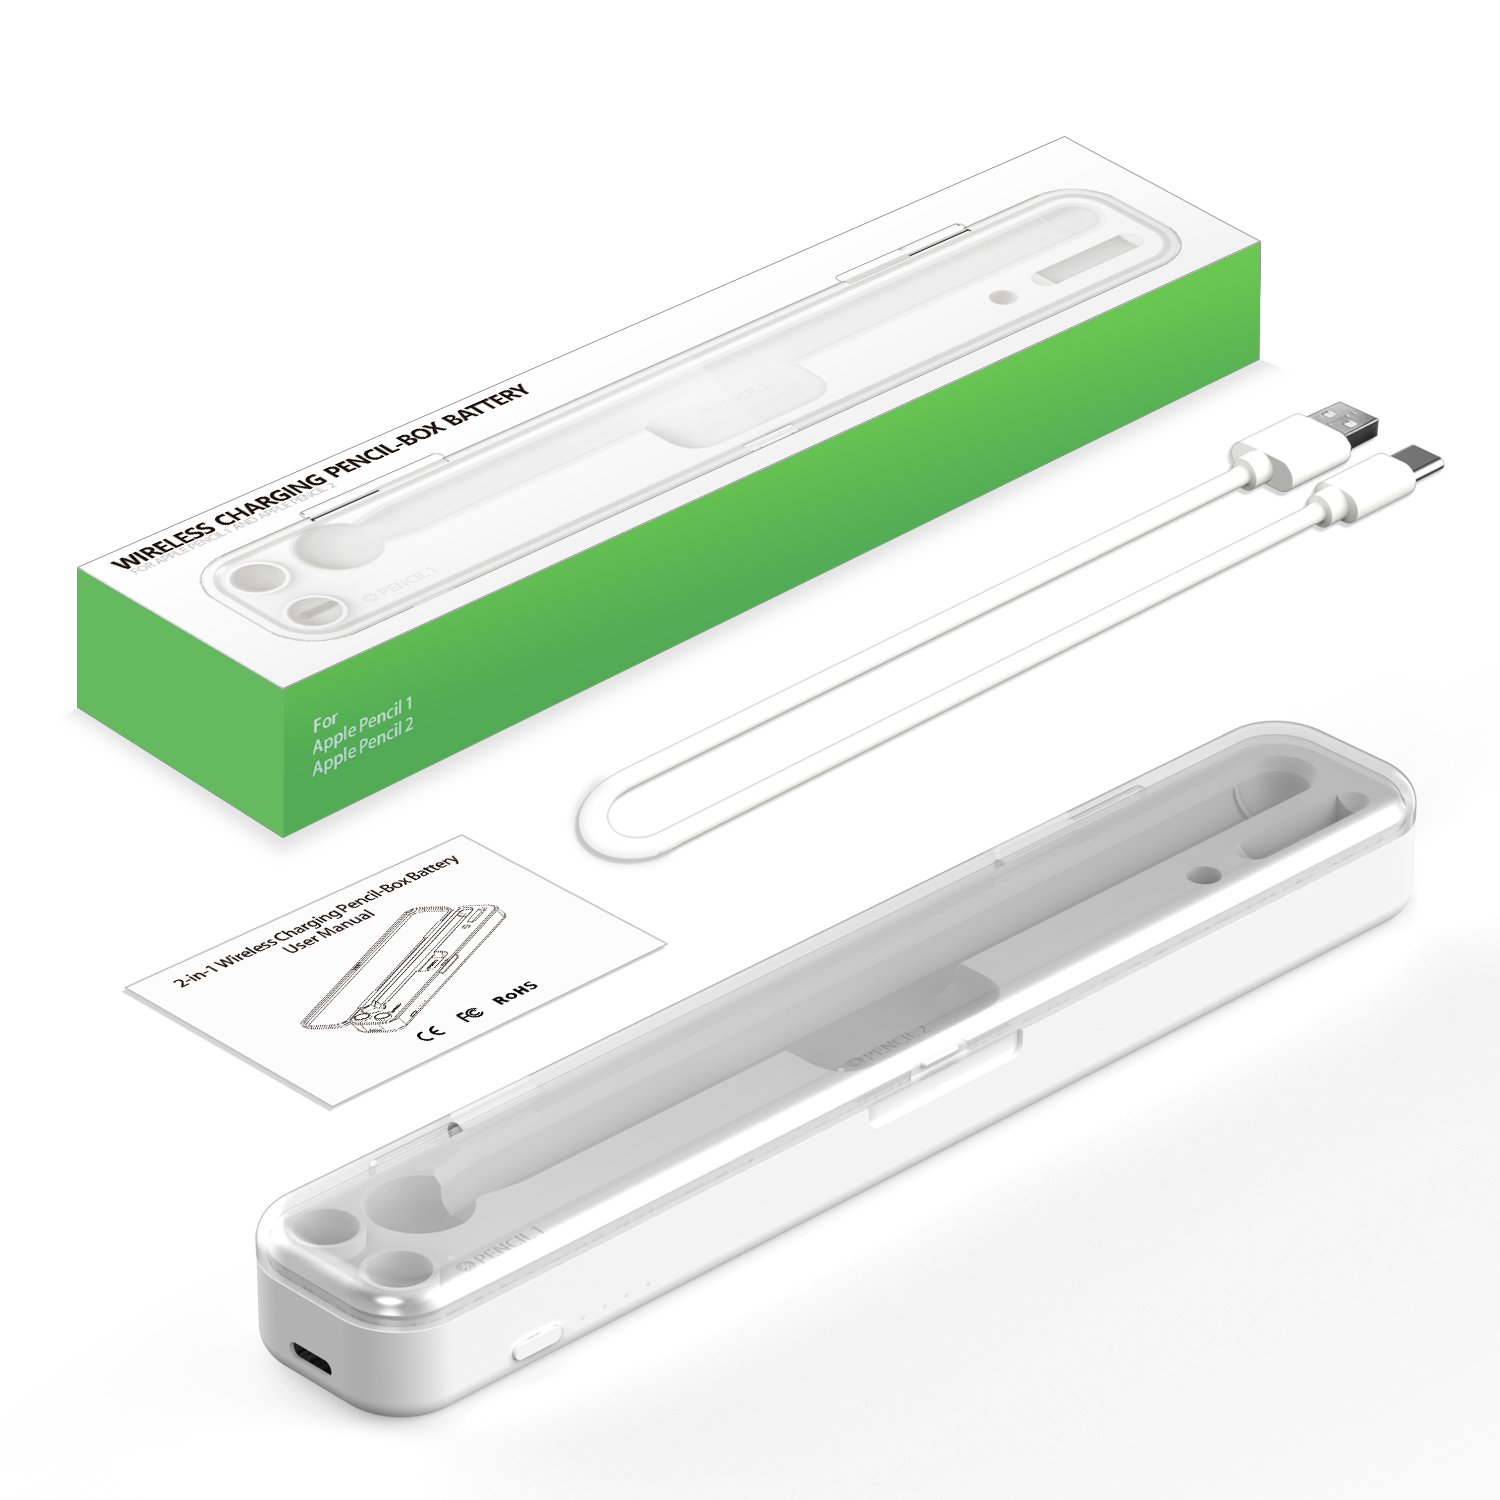 2-in-1 Wireless Charging Apple Pencil Box with battery